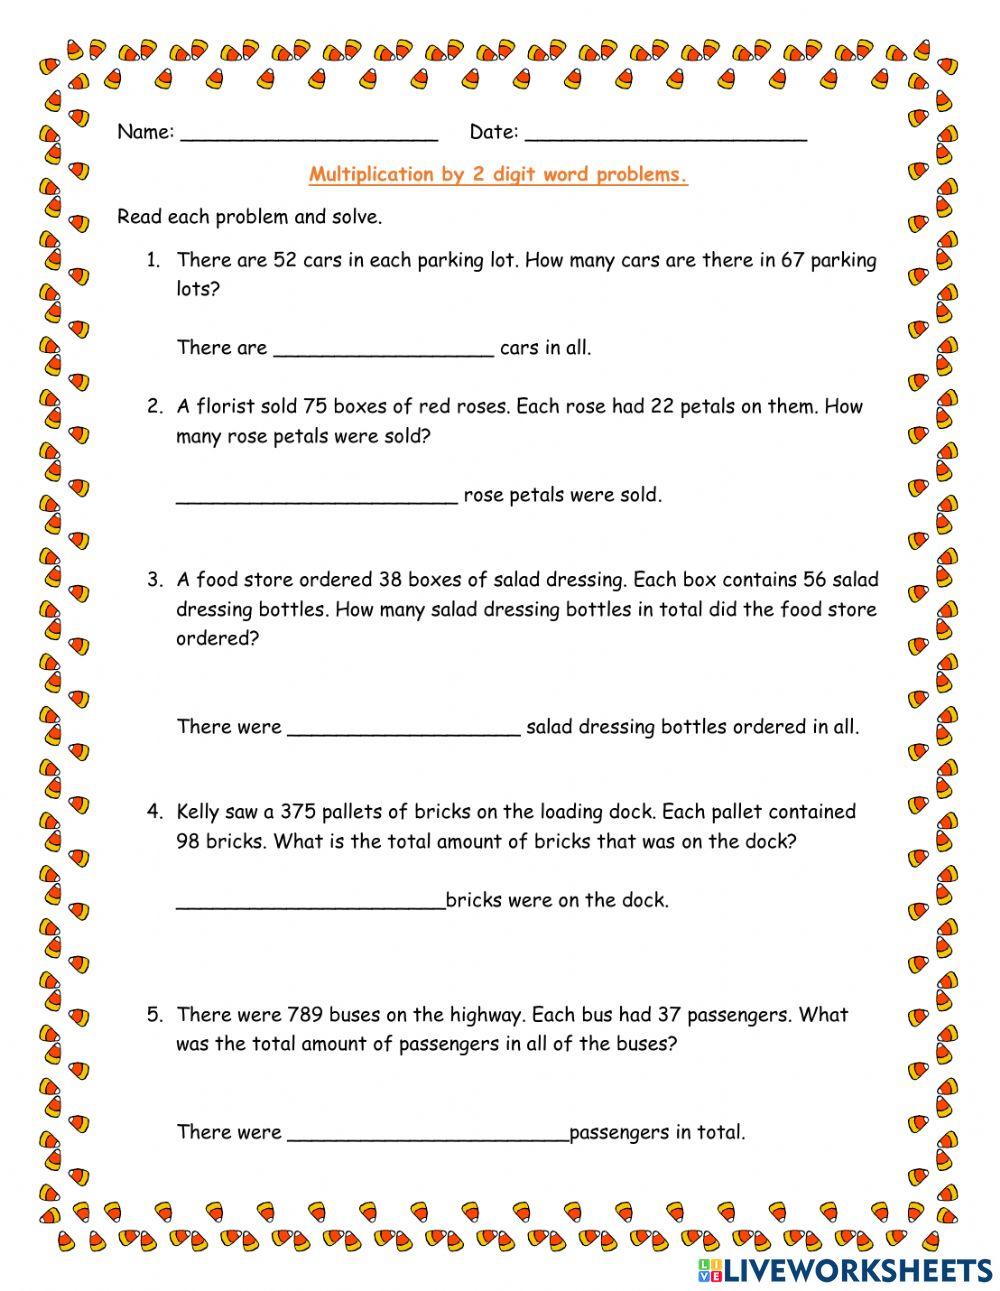 Multiplication By 2 Digit Word Problems